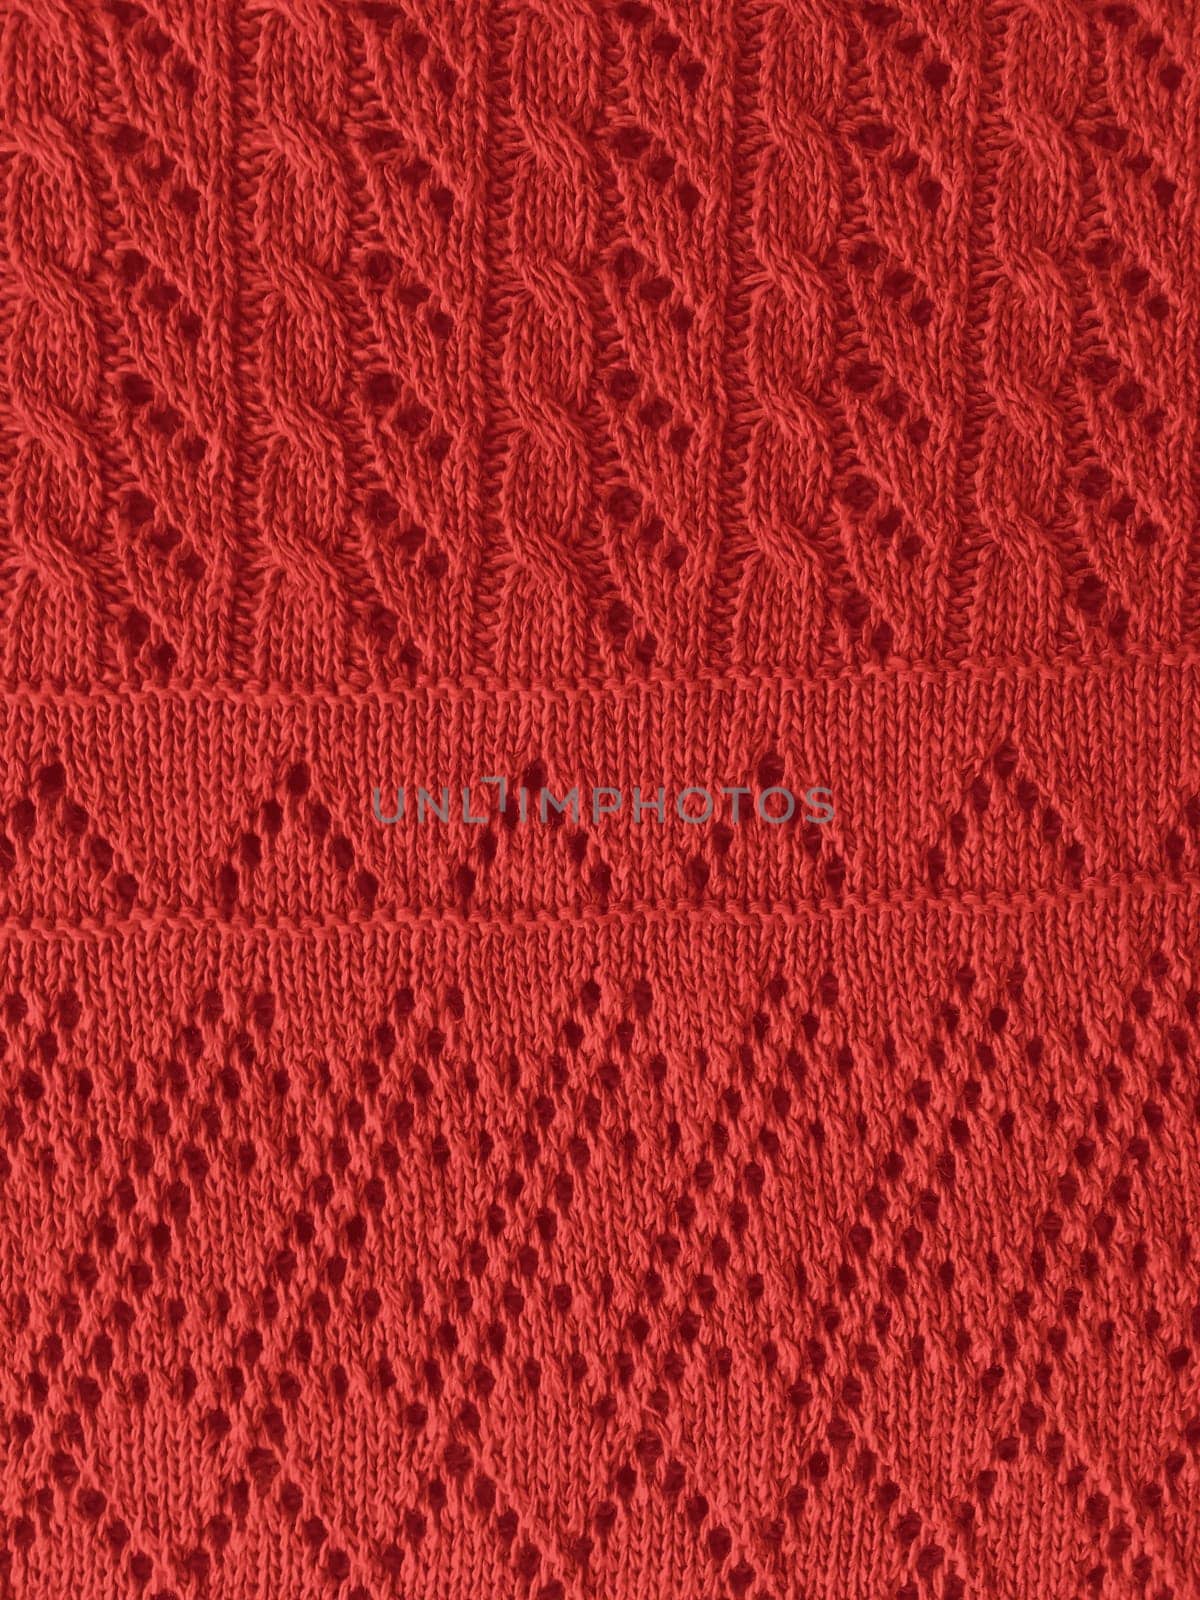 Xmas Knitted Texture. Organic Soft Scarf. Winter Nordic Cashmere. Christmas Knitting Pattern. Vintage Woolen Fabric. Detail Handmade Thread Garment. Red Christmas Knitted Background.